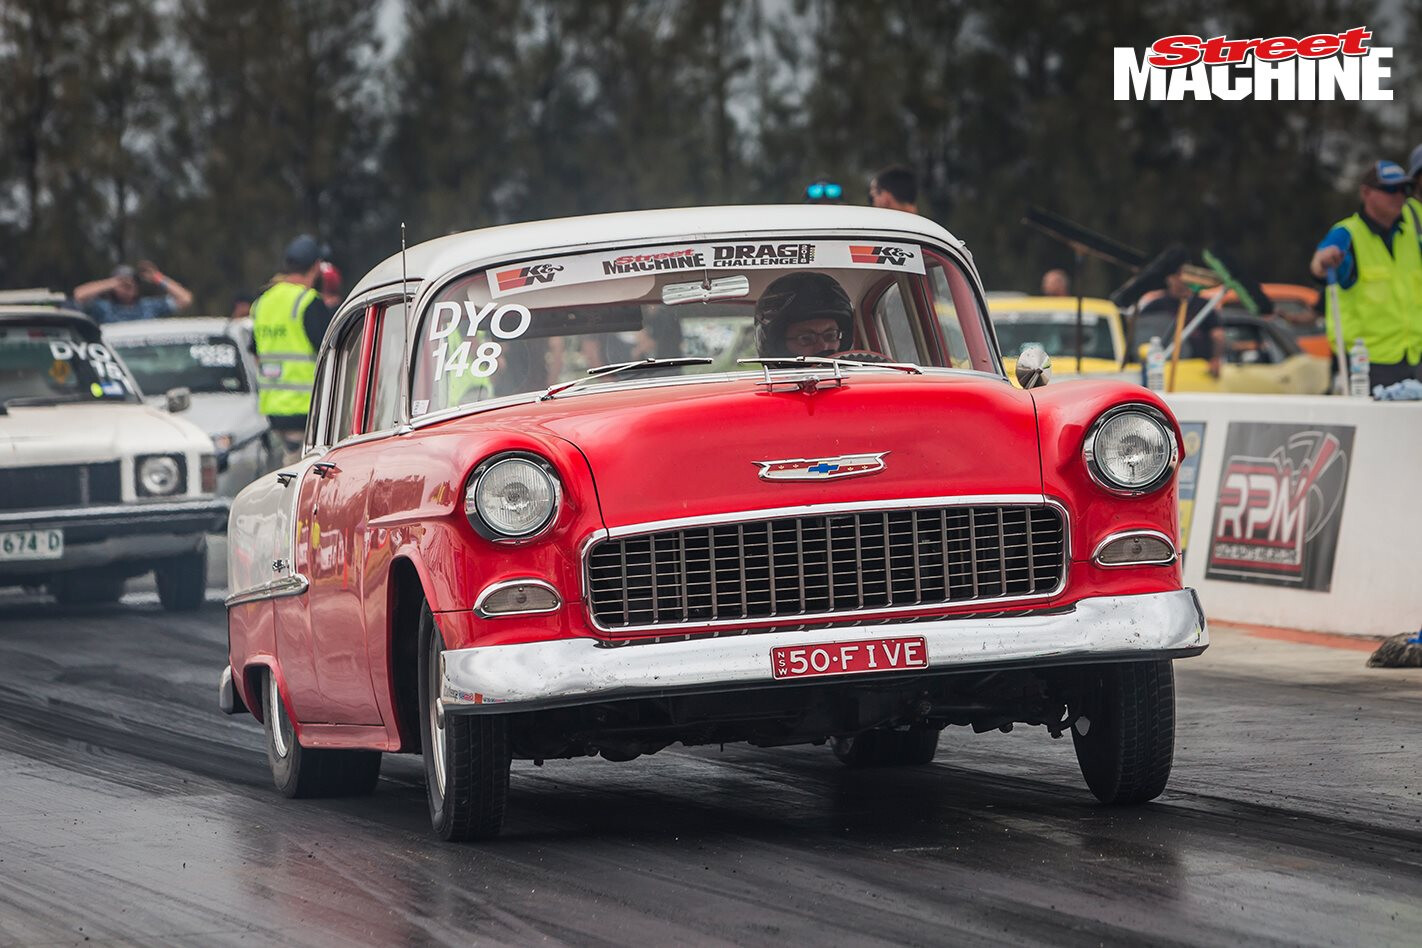 K&N Filters Dial Your Own action at Drag Challenge 2018 – Video